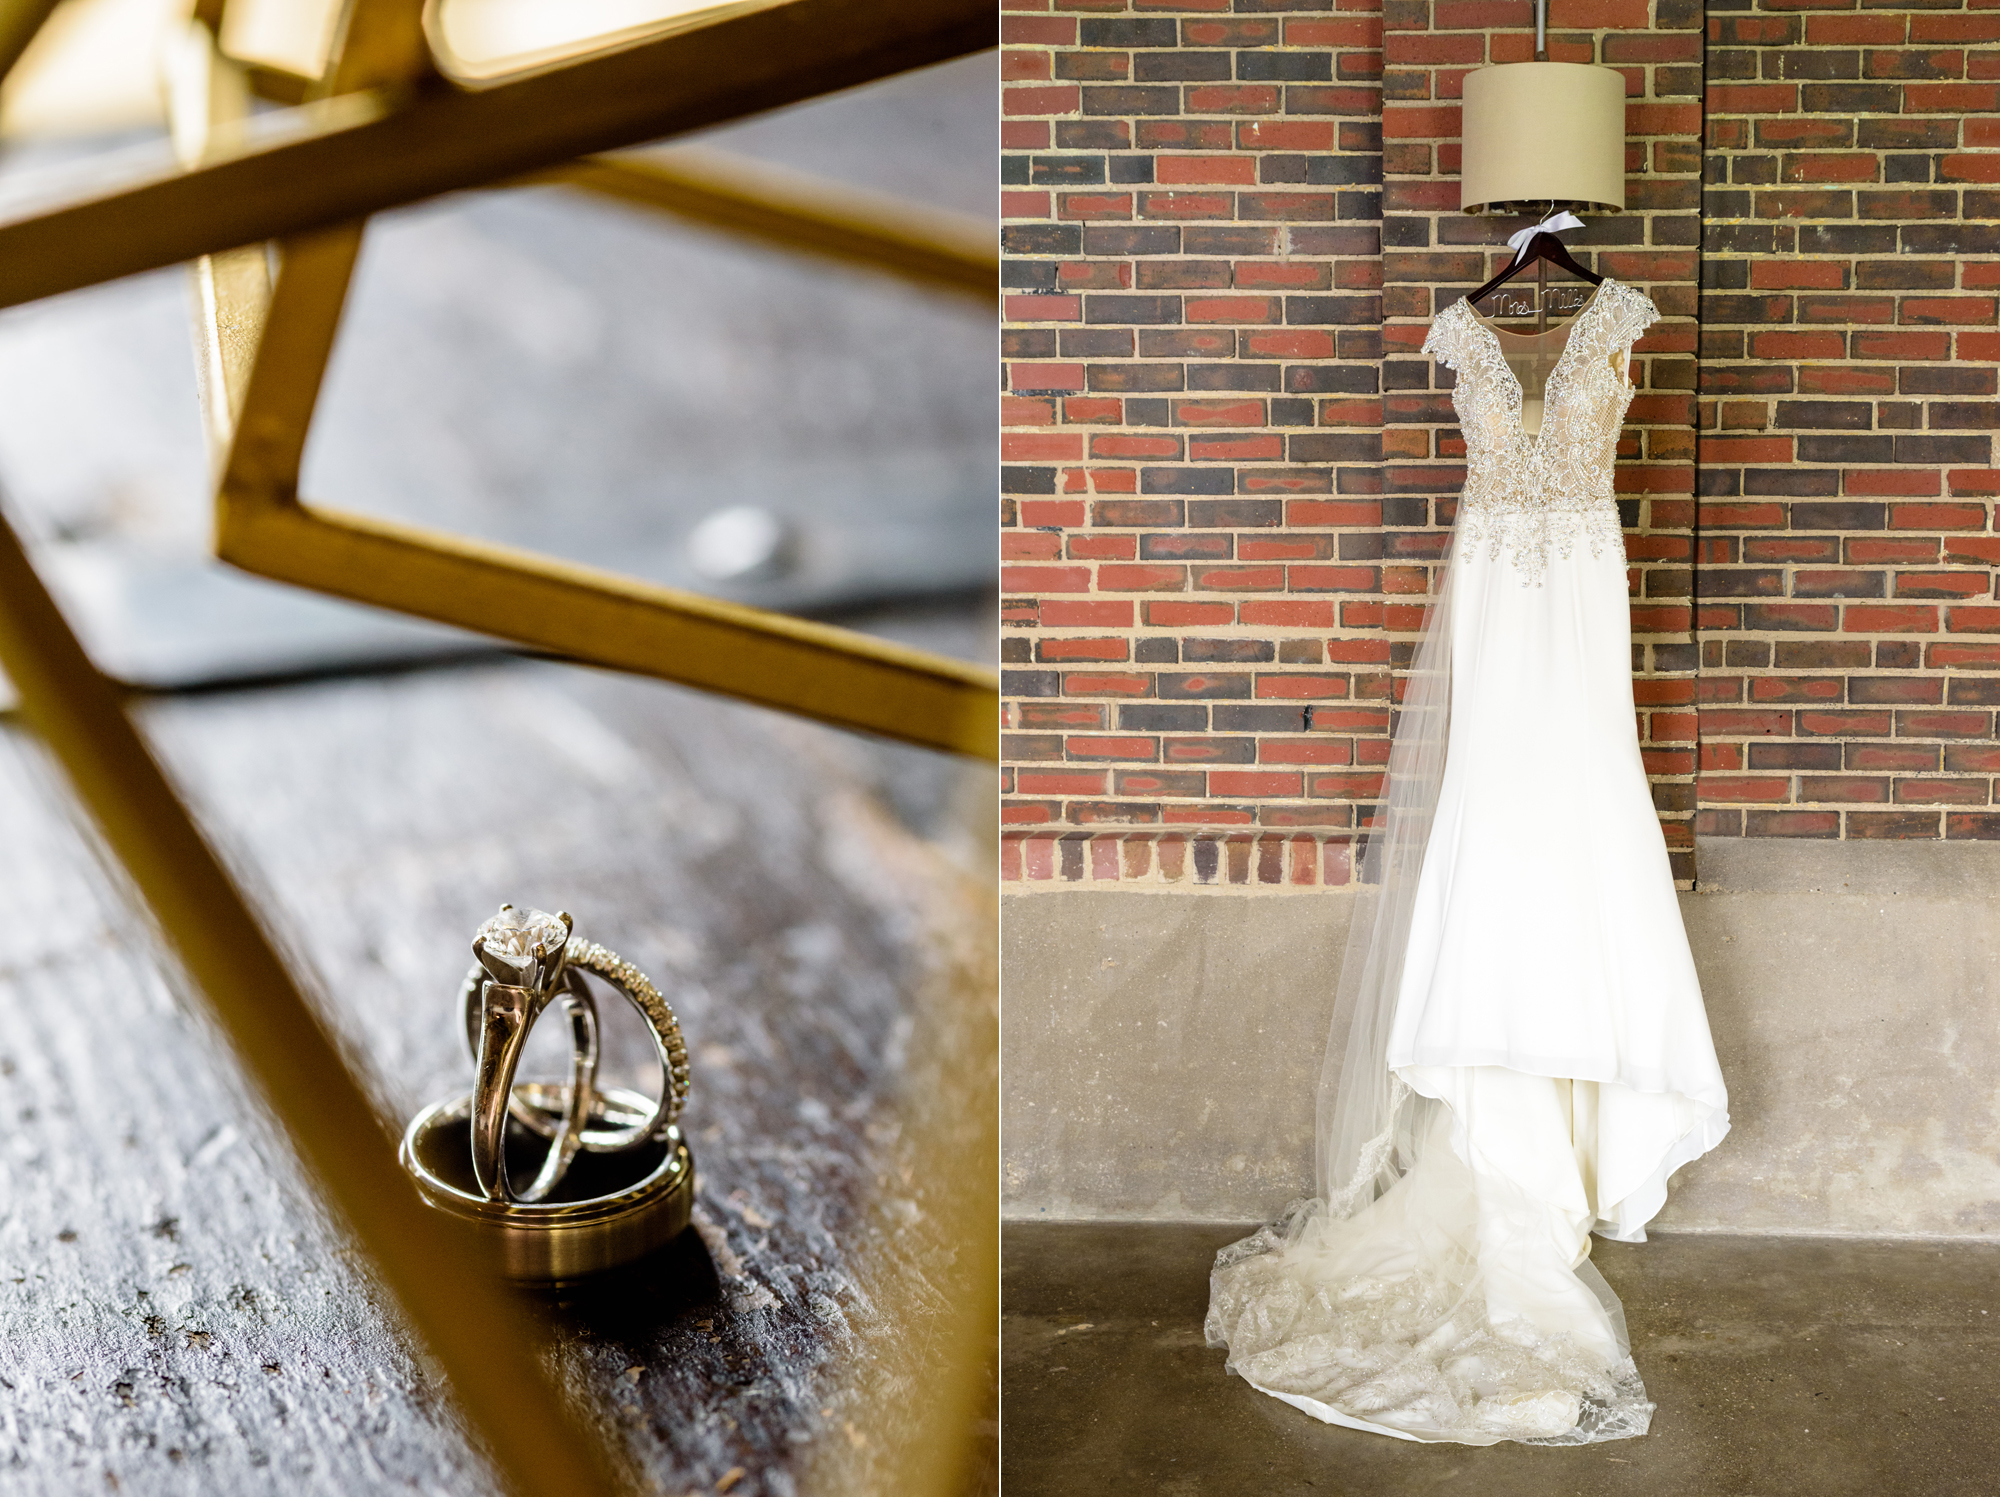 Bride’s Details for her wedding ceremony at the Armory